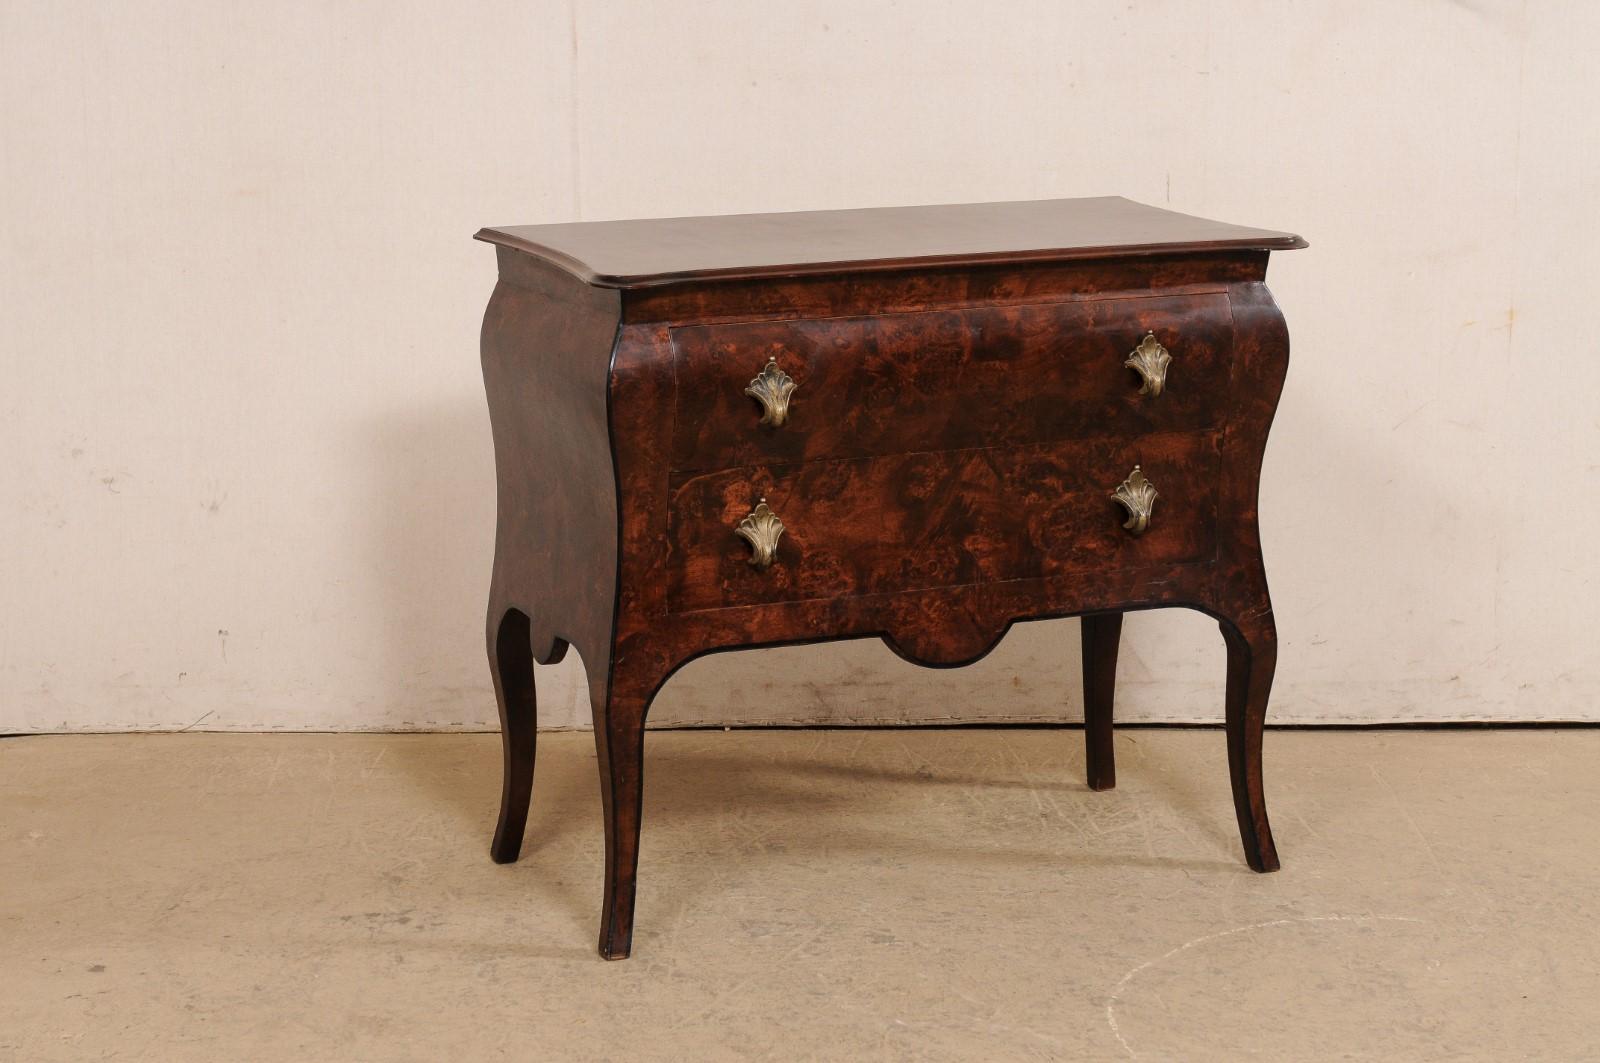 An Italian raised chest of two drawers with burled wood veneer. This vintage chest from Italy is abundant with softly curved lines; a top with rounded front corners and a shallow convex front, a slightly bowed body, single scallops adorning the